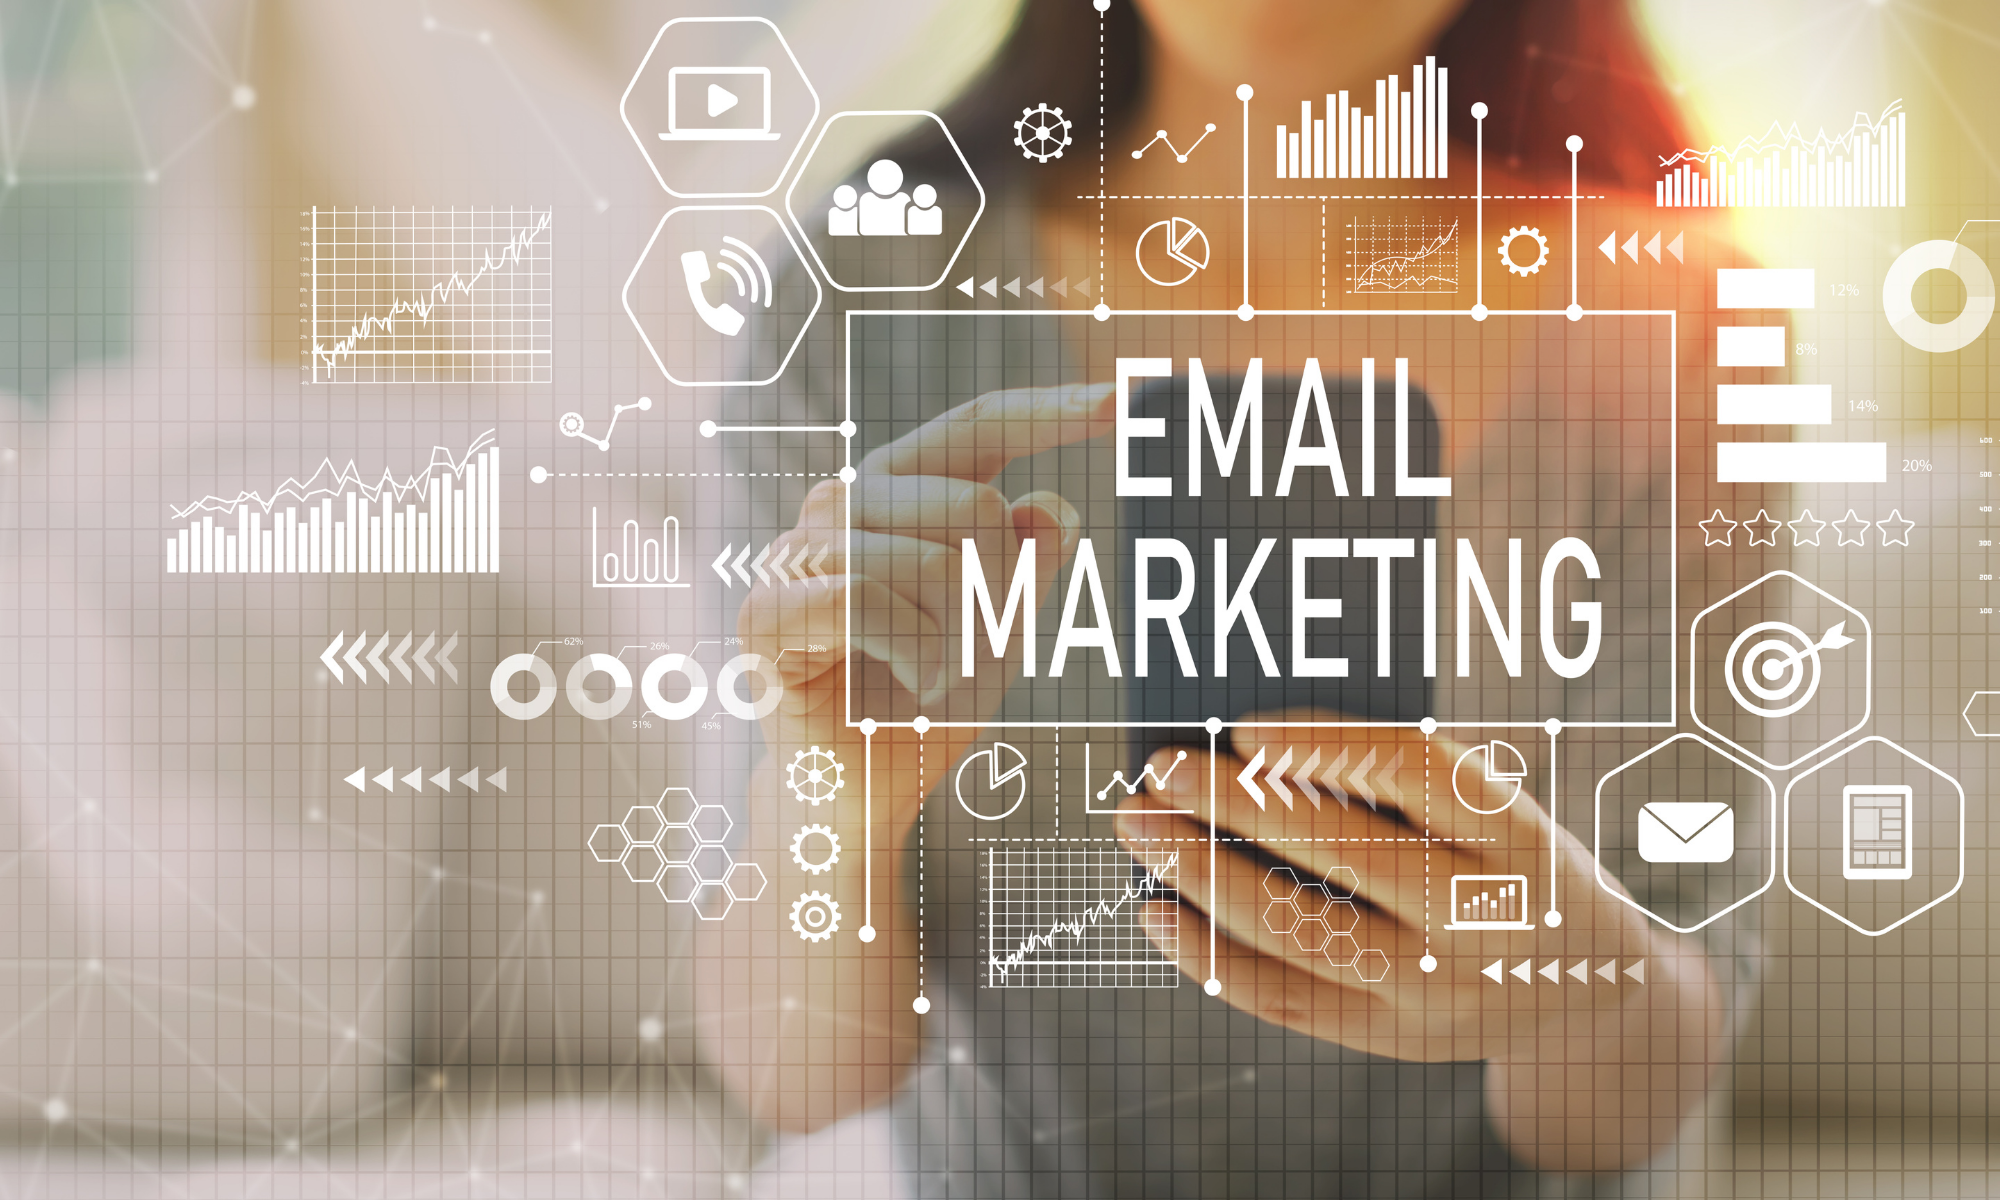 How To Use Email Marketing For A Small Business